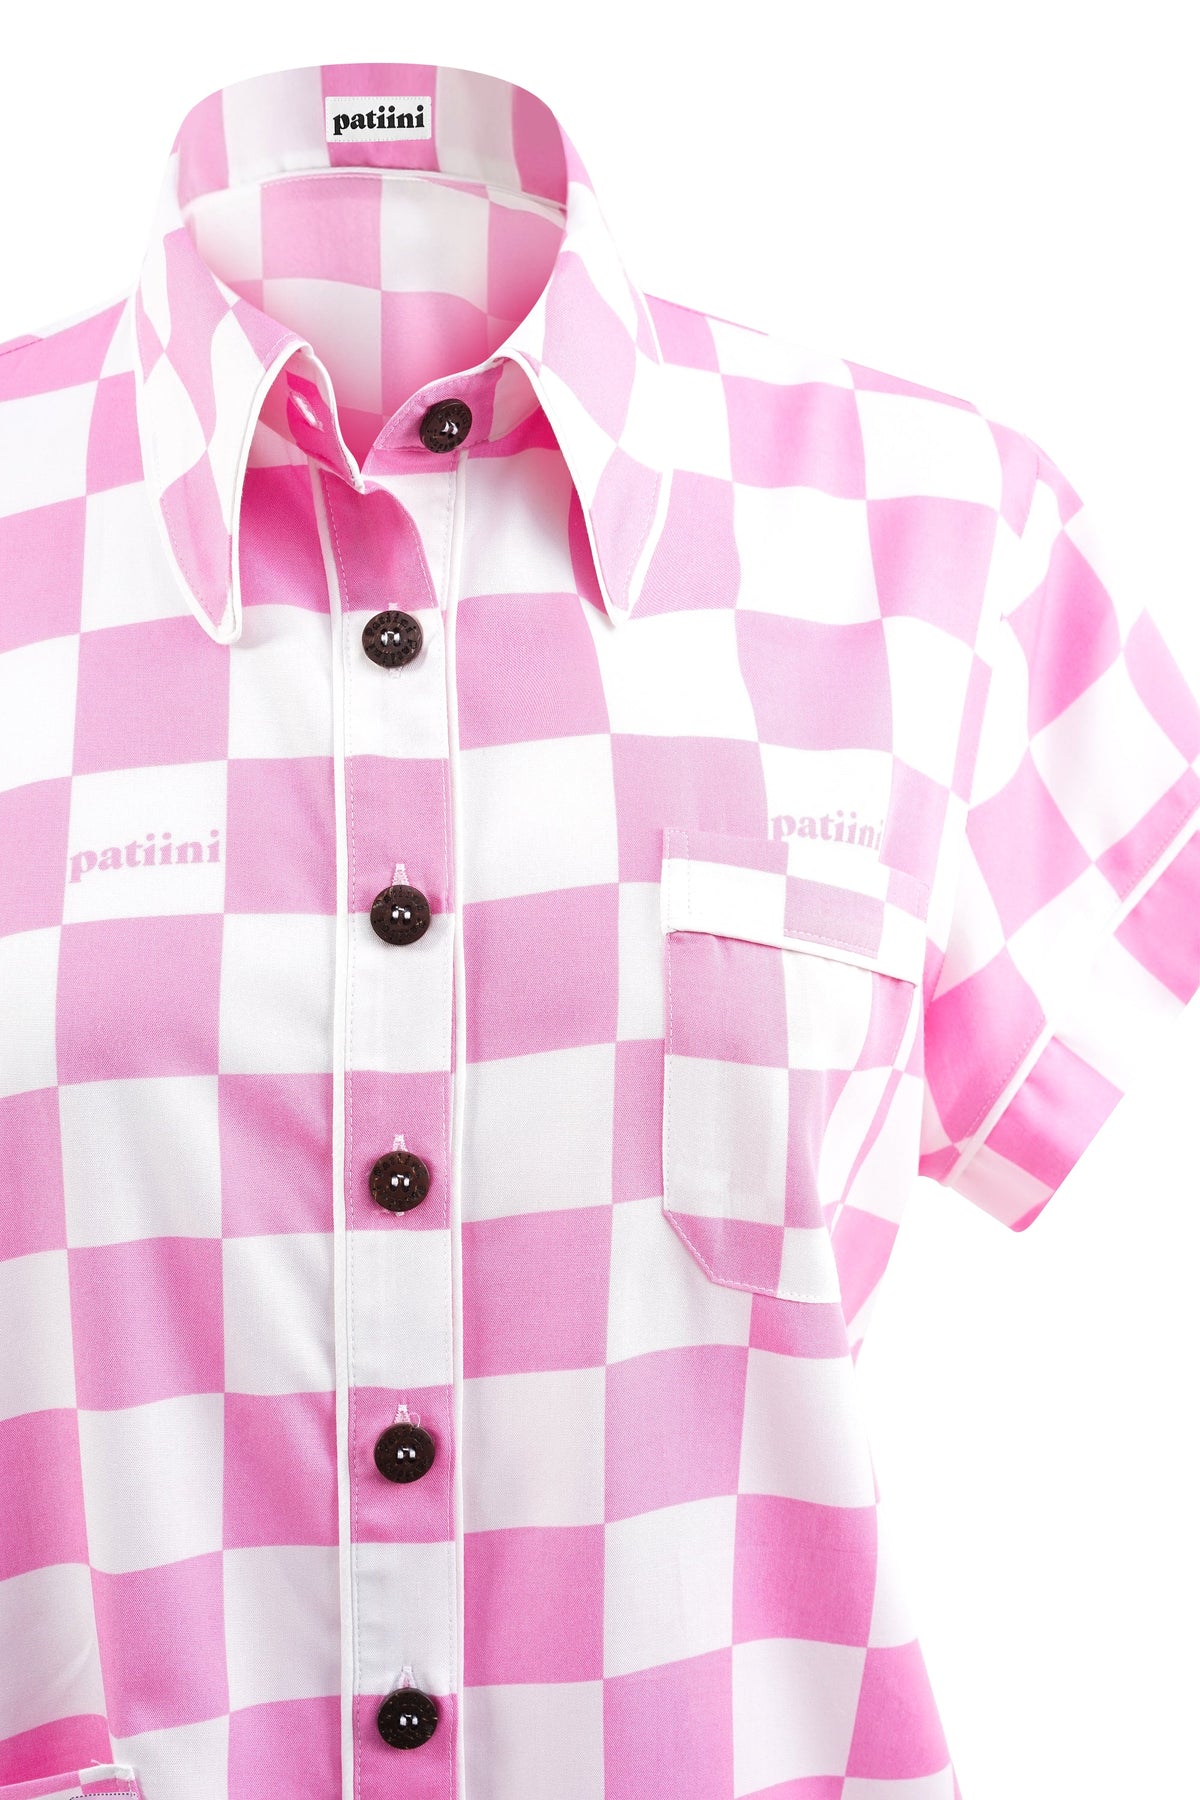 Close-up of pink and white checkered button-down shirt with coconut buttons.